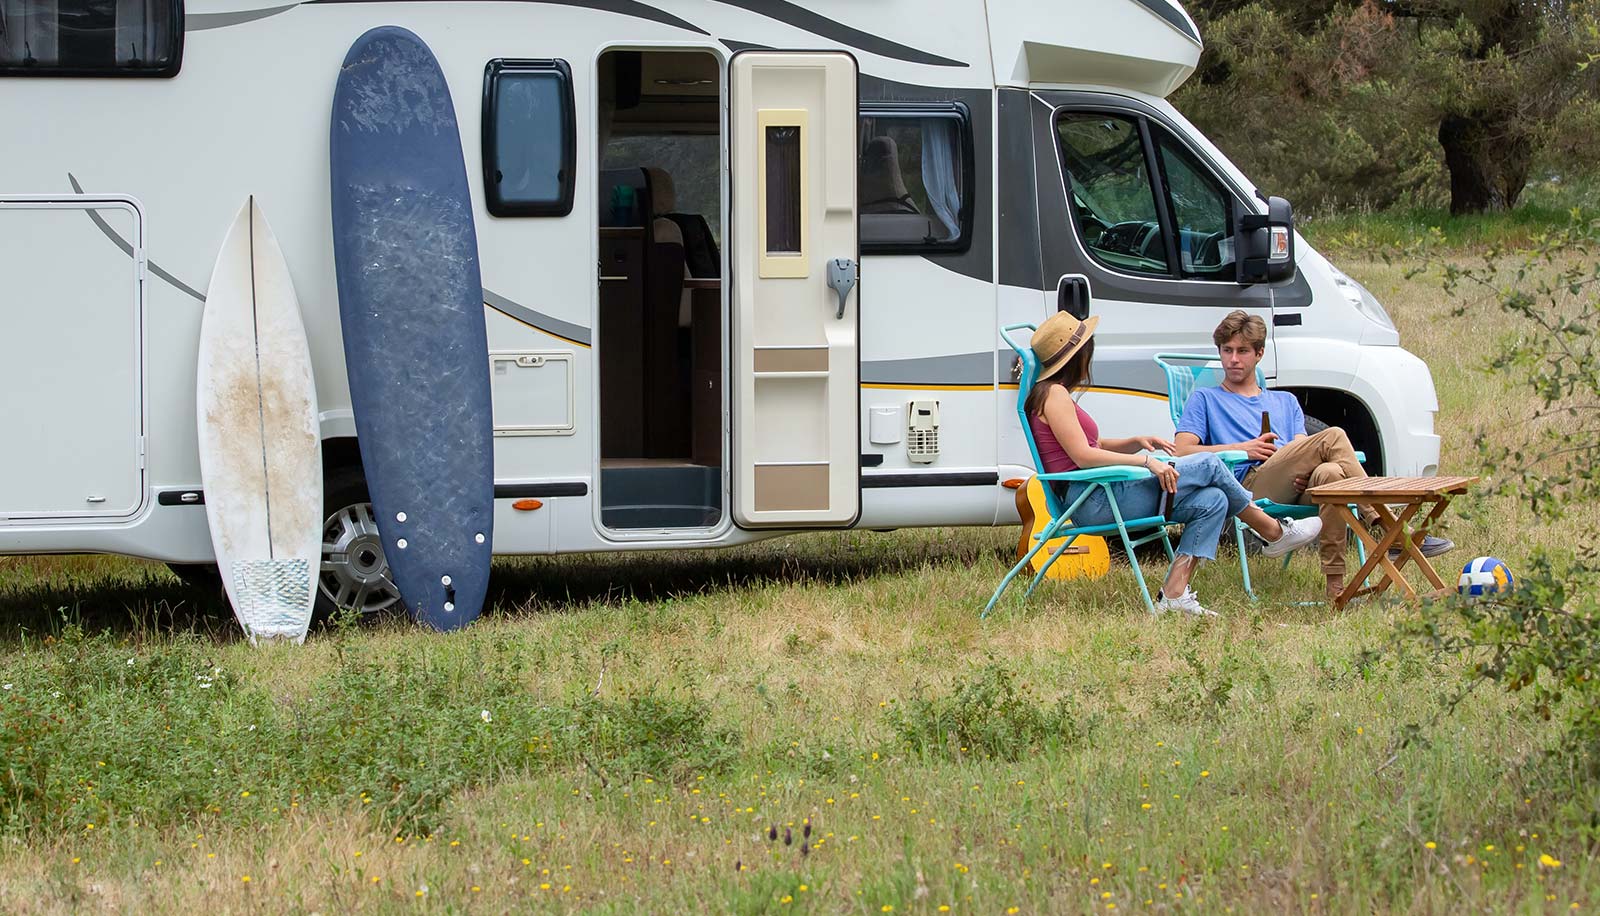 Surfers' campervan on a campsite in Oléron